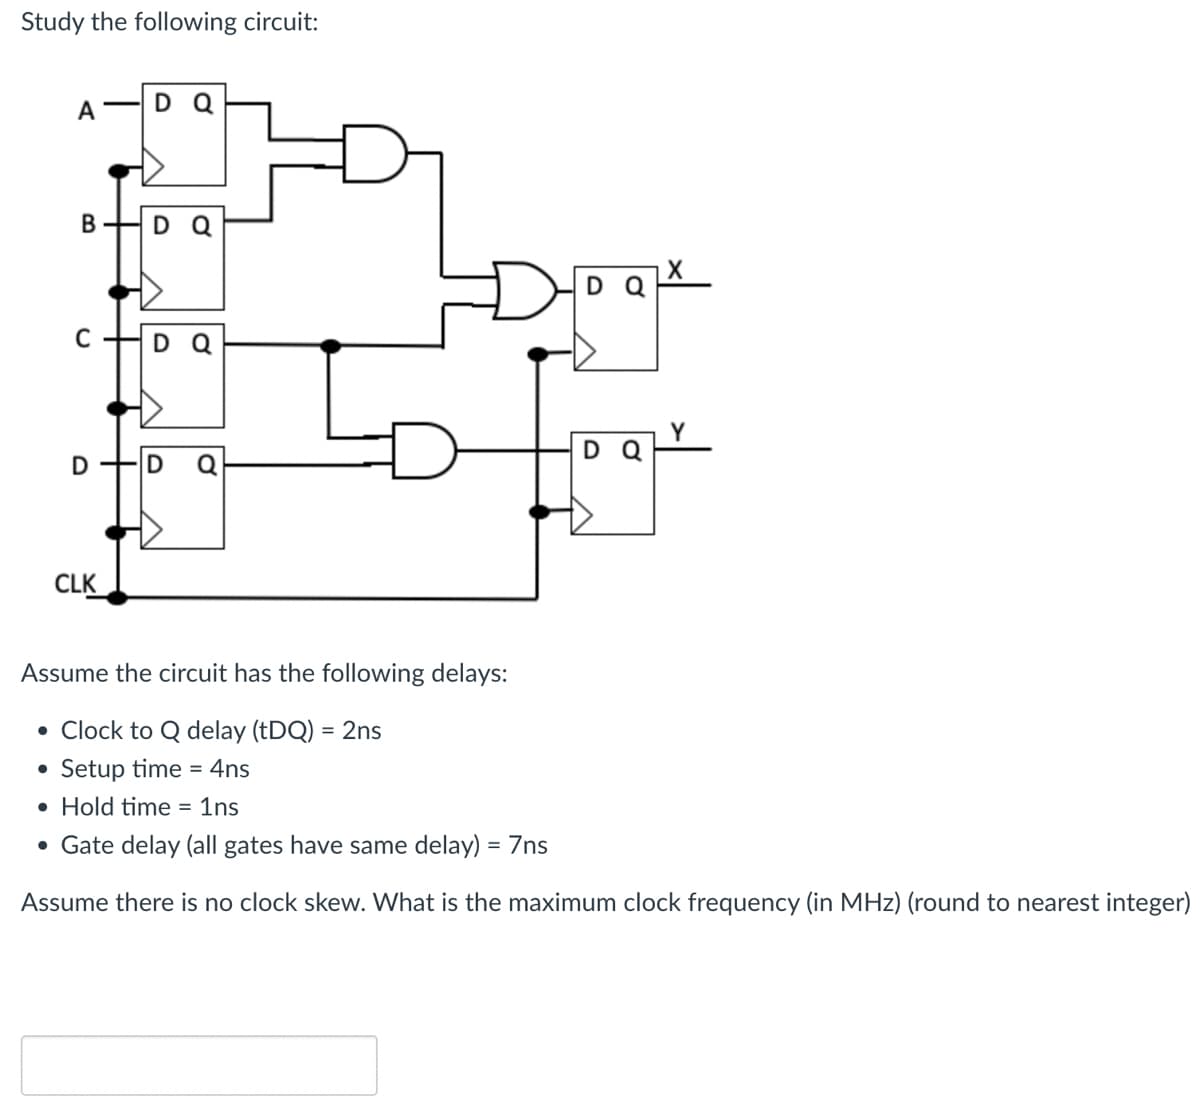 Study the following circuit:
A
DQ
B
D
C
DQ
D
D
CLK
Assume the circuit has the following delays:
• Clock to Q delay (tDQ) = 2ns
●
Setup time=4ns
Hold time = 1ns
• Gate delay (all gates have same delay) = 7ns
Assume there is no clock skew. What is the maximum clock frequency (in MHz) (round to nearest integer)